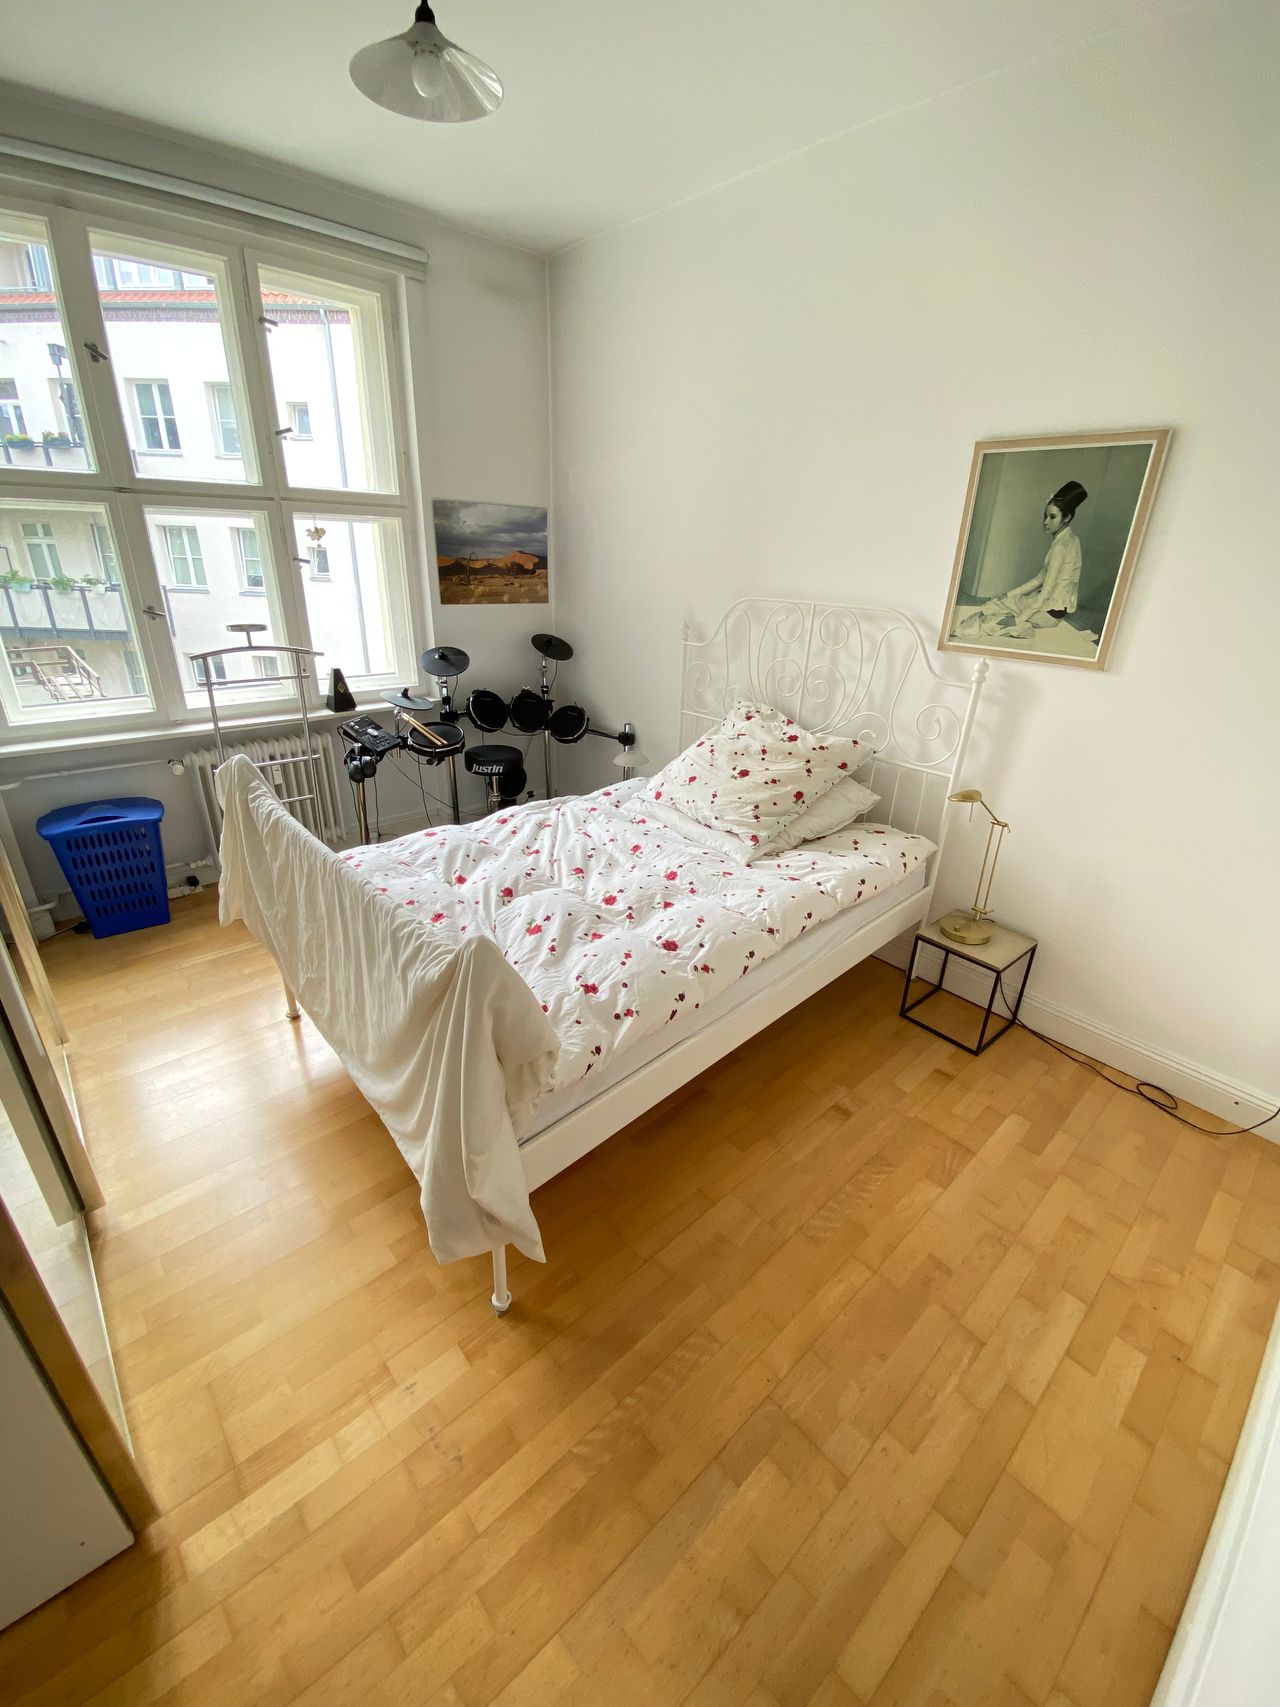 Lovingly furnished apartment in the center of Grunewald, Berlin